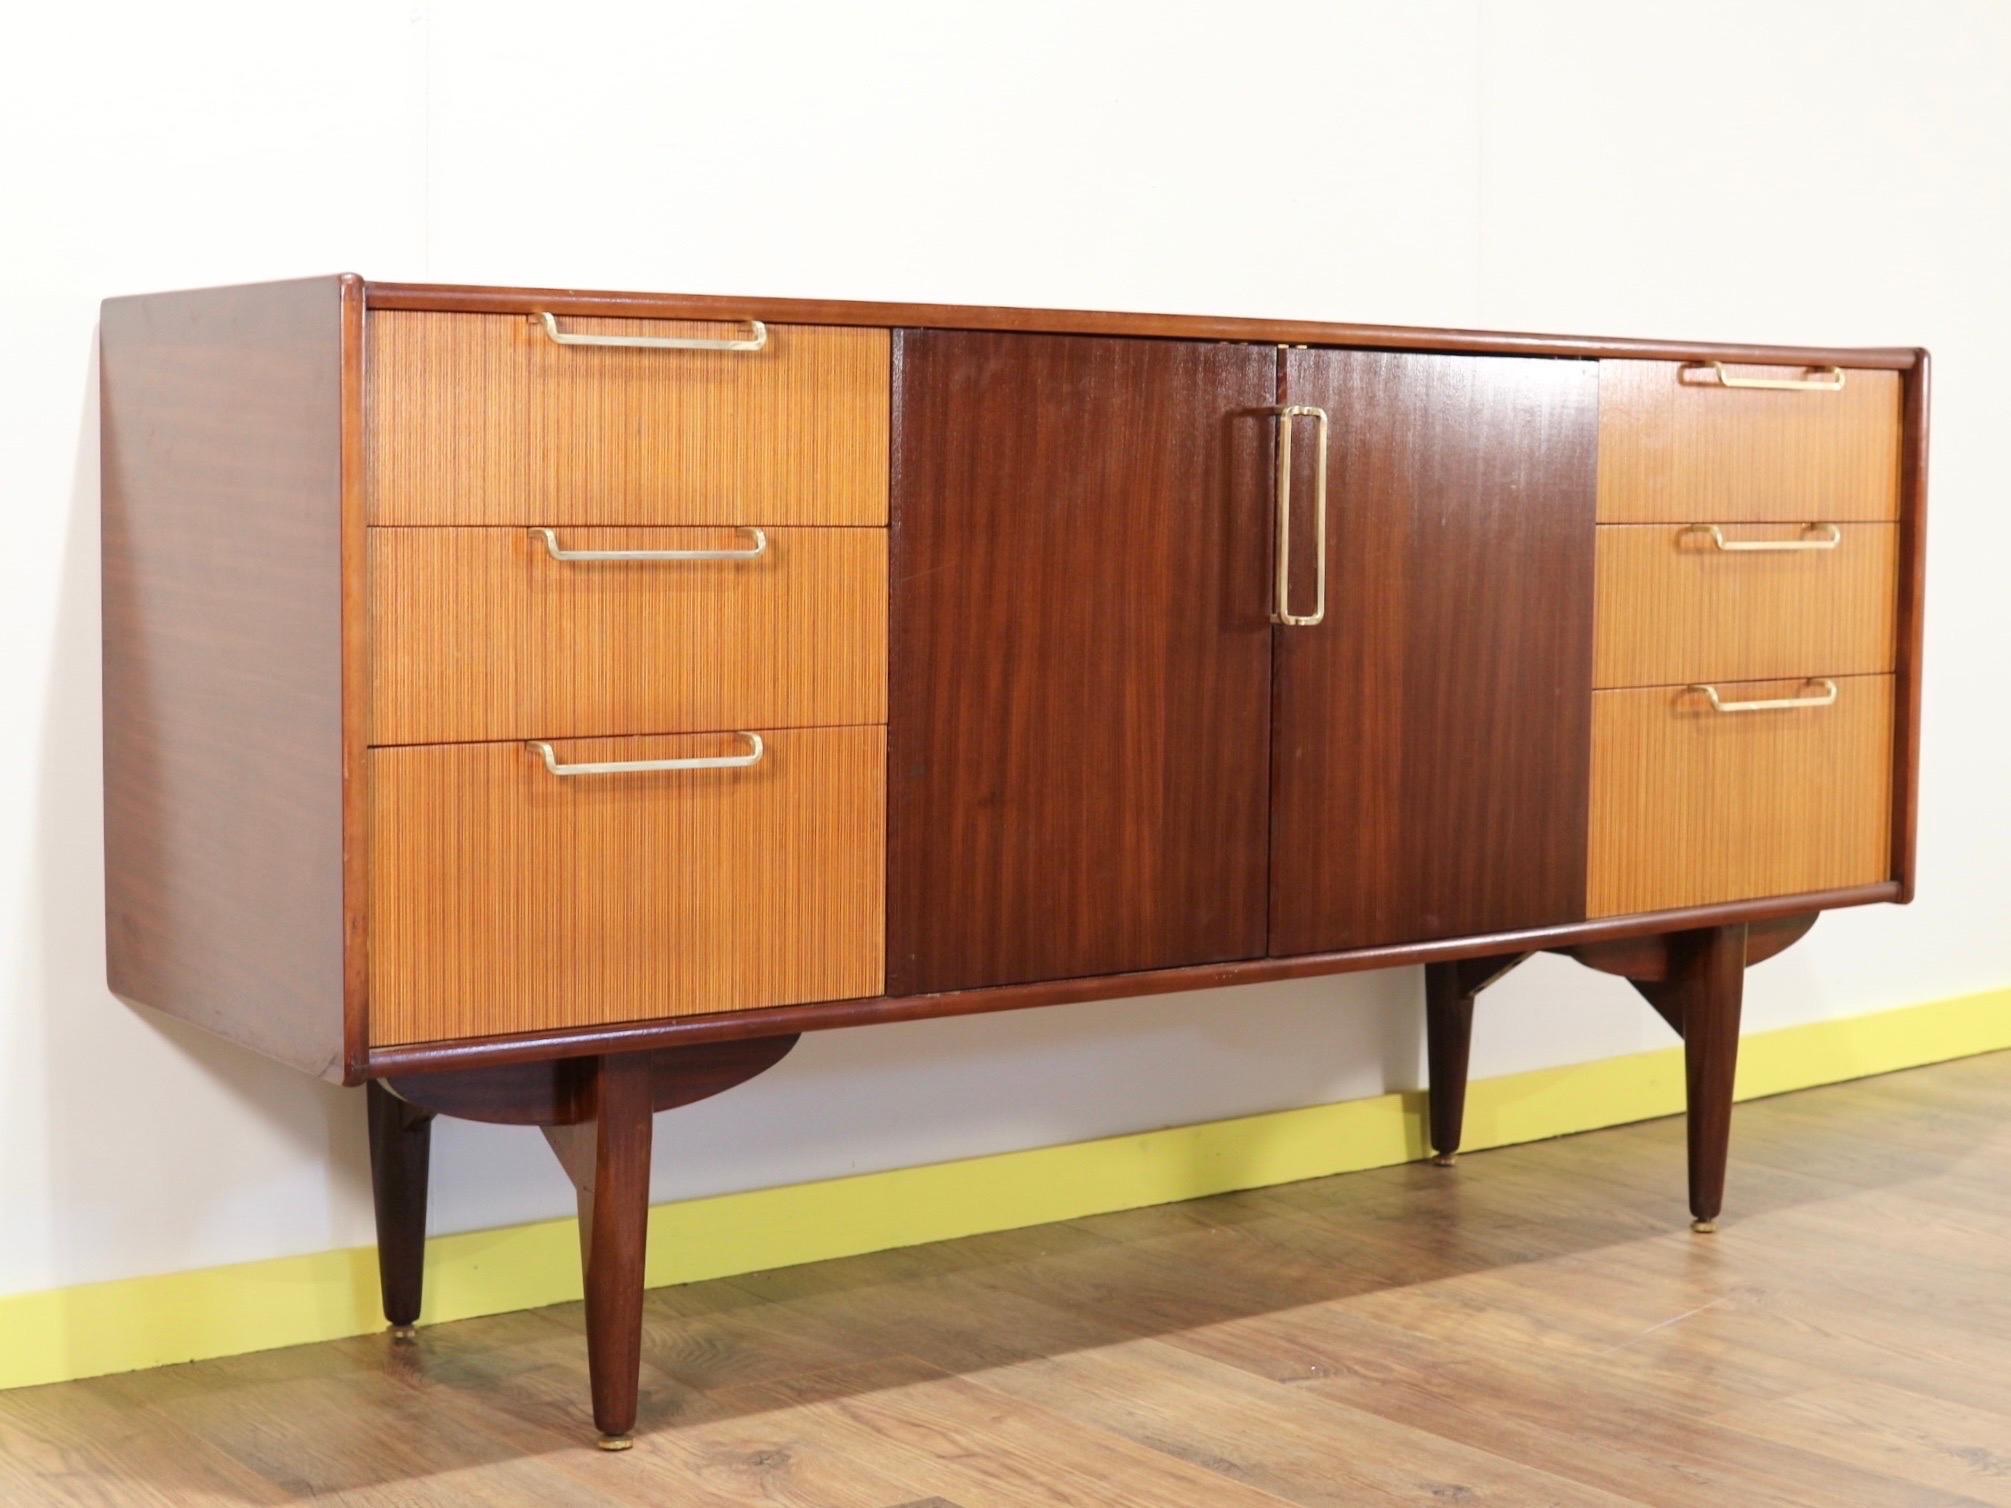 Teak Mid-Century Modern Credenza Sideboard by Beautility